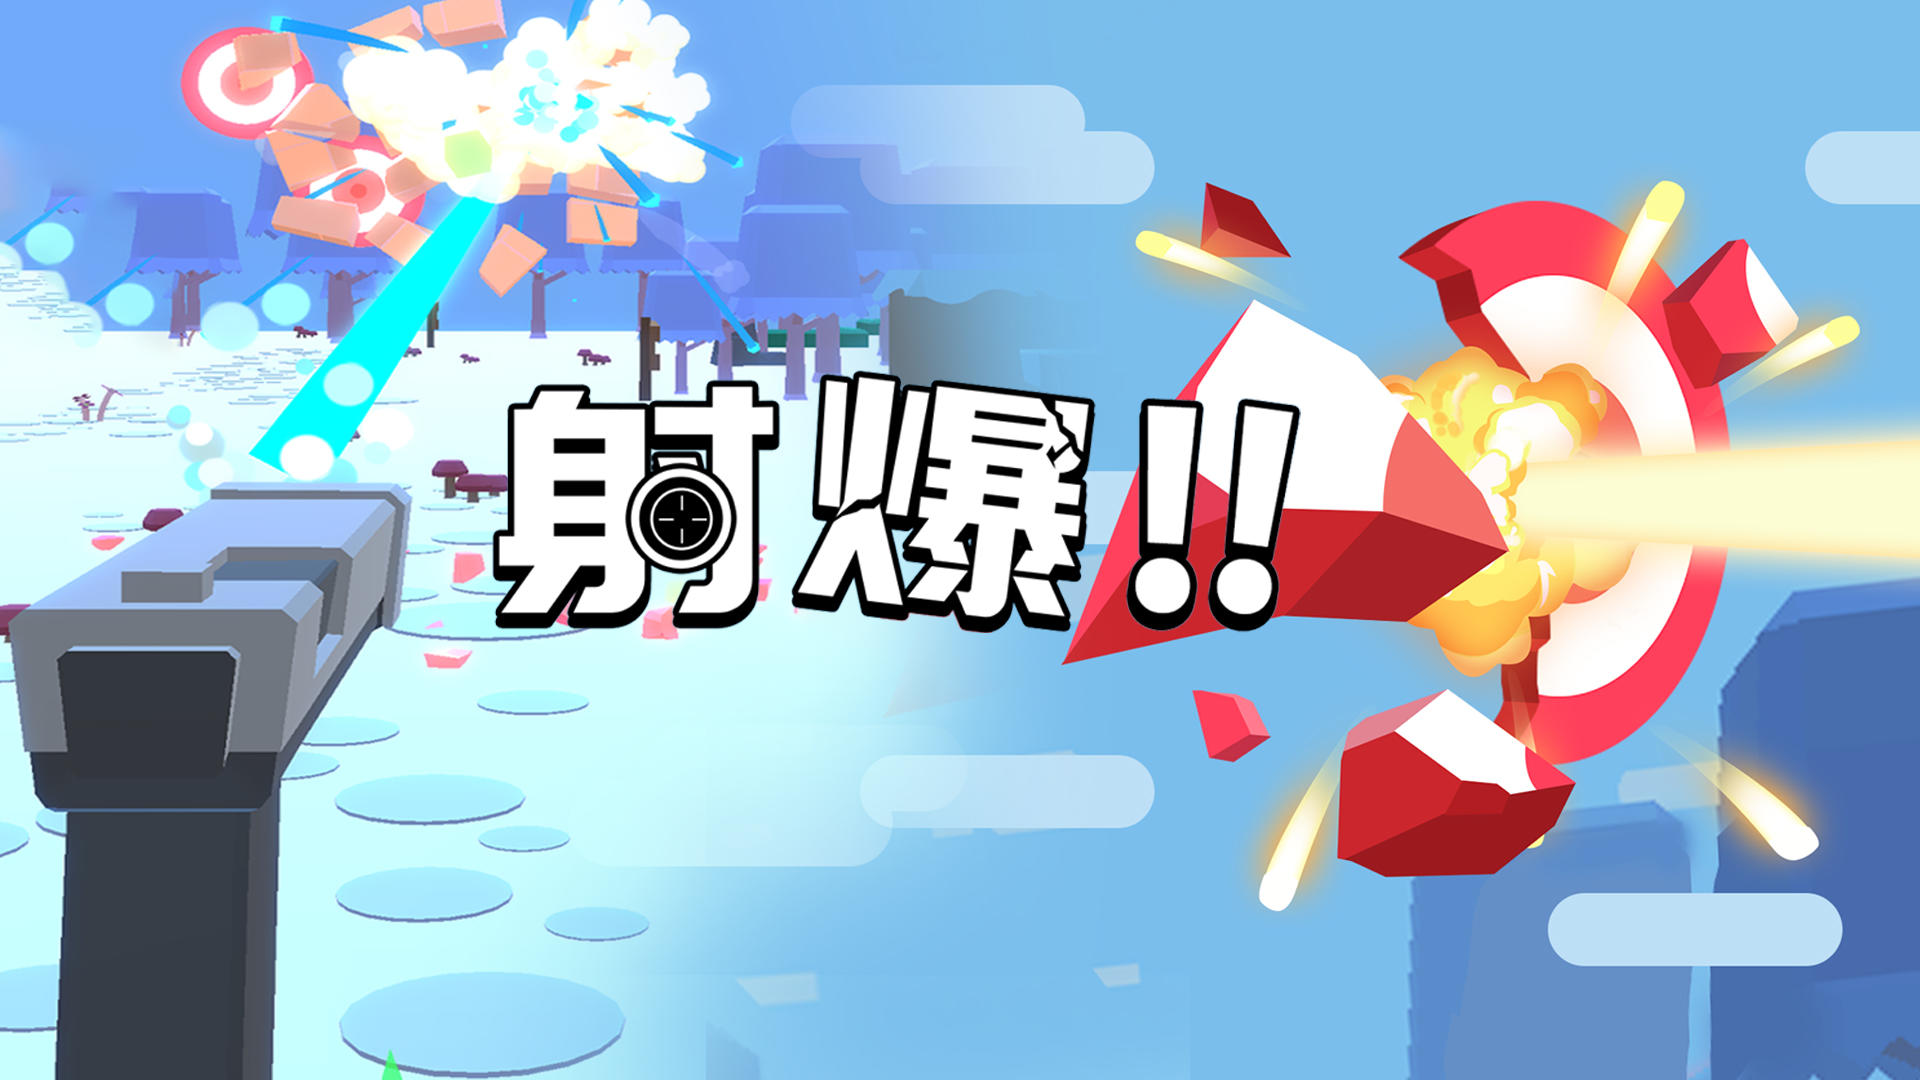 Banner of 射爆!!! 1.0.8